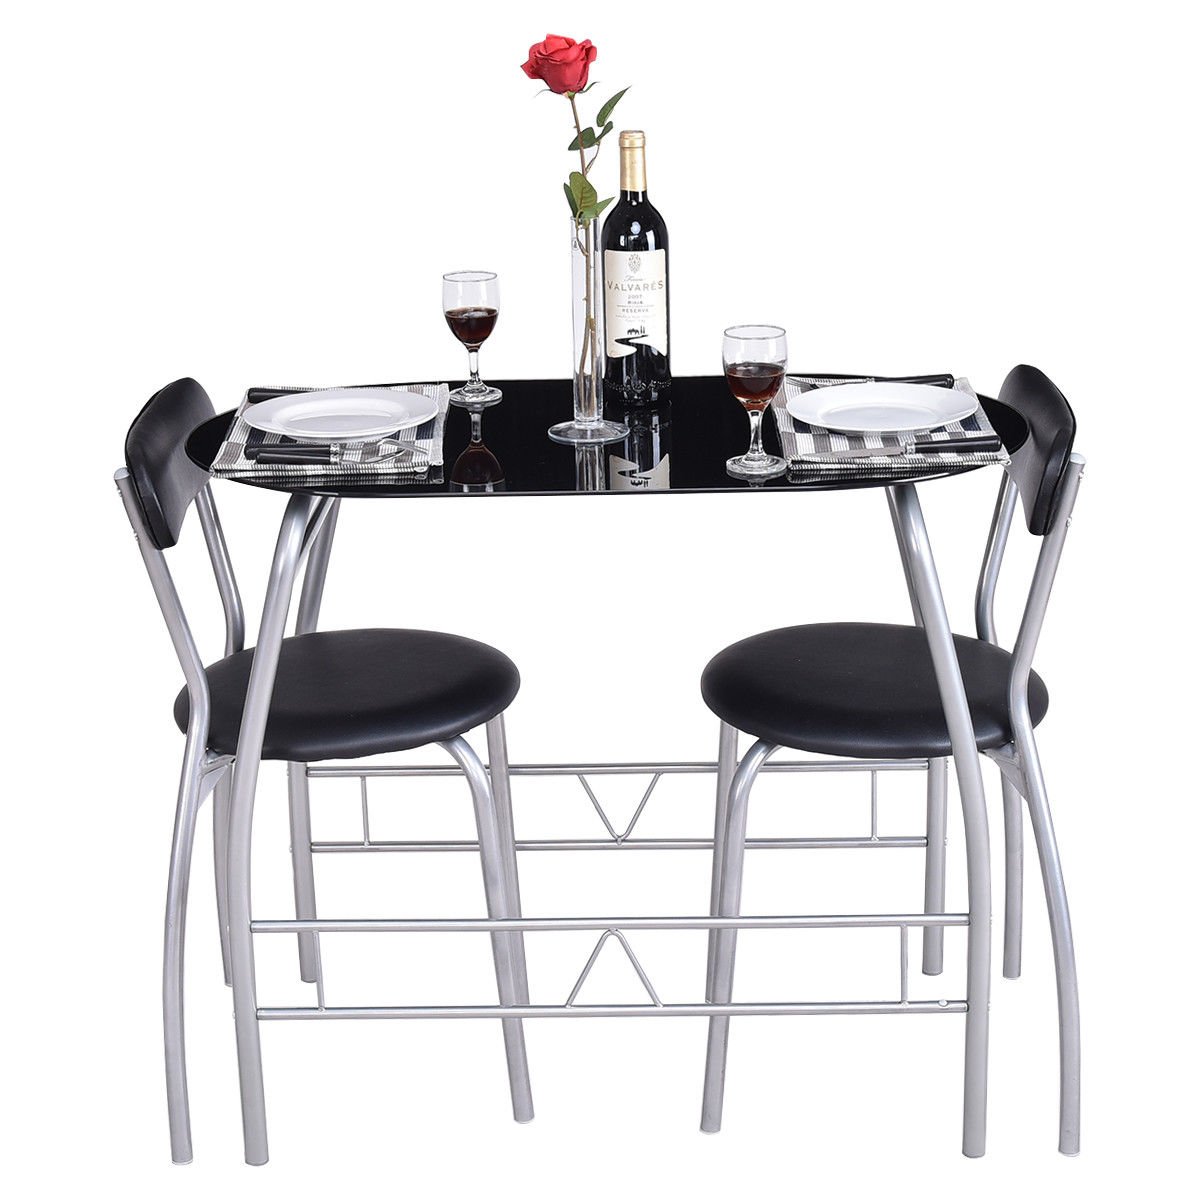 Traveller Location - Giantex 3 Piece Bistro Dining Set with Breakfast Chairs,  Tempered Glass Table Top Furniture - Table & Chair Sets